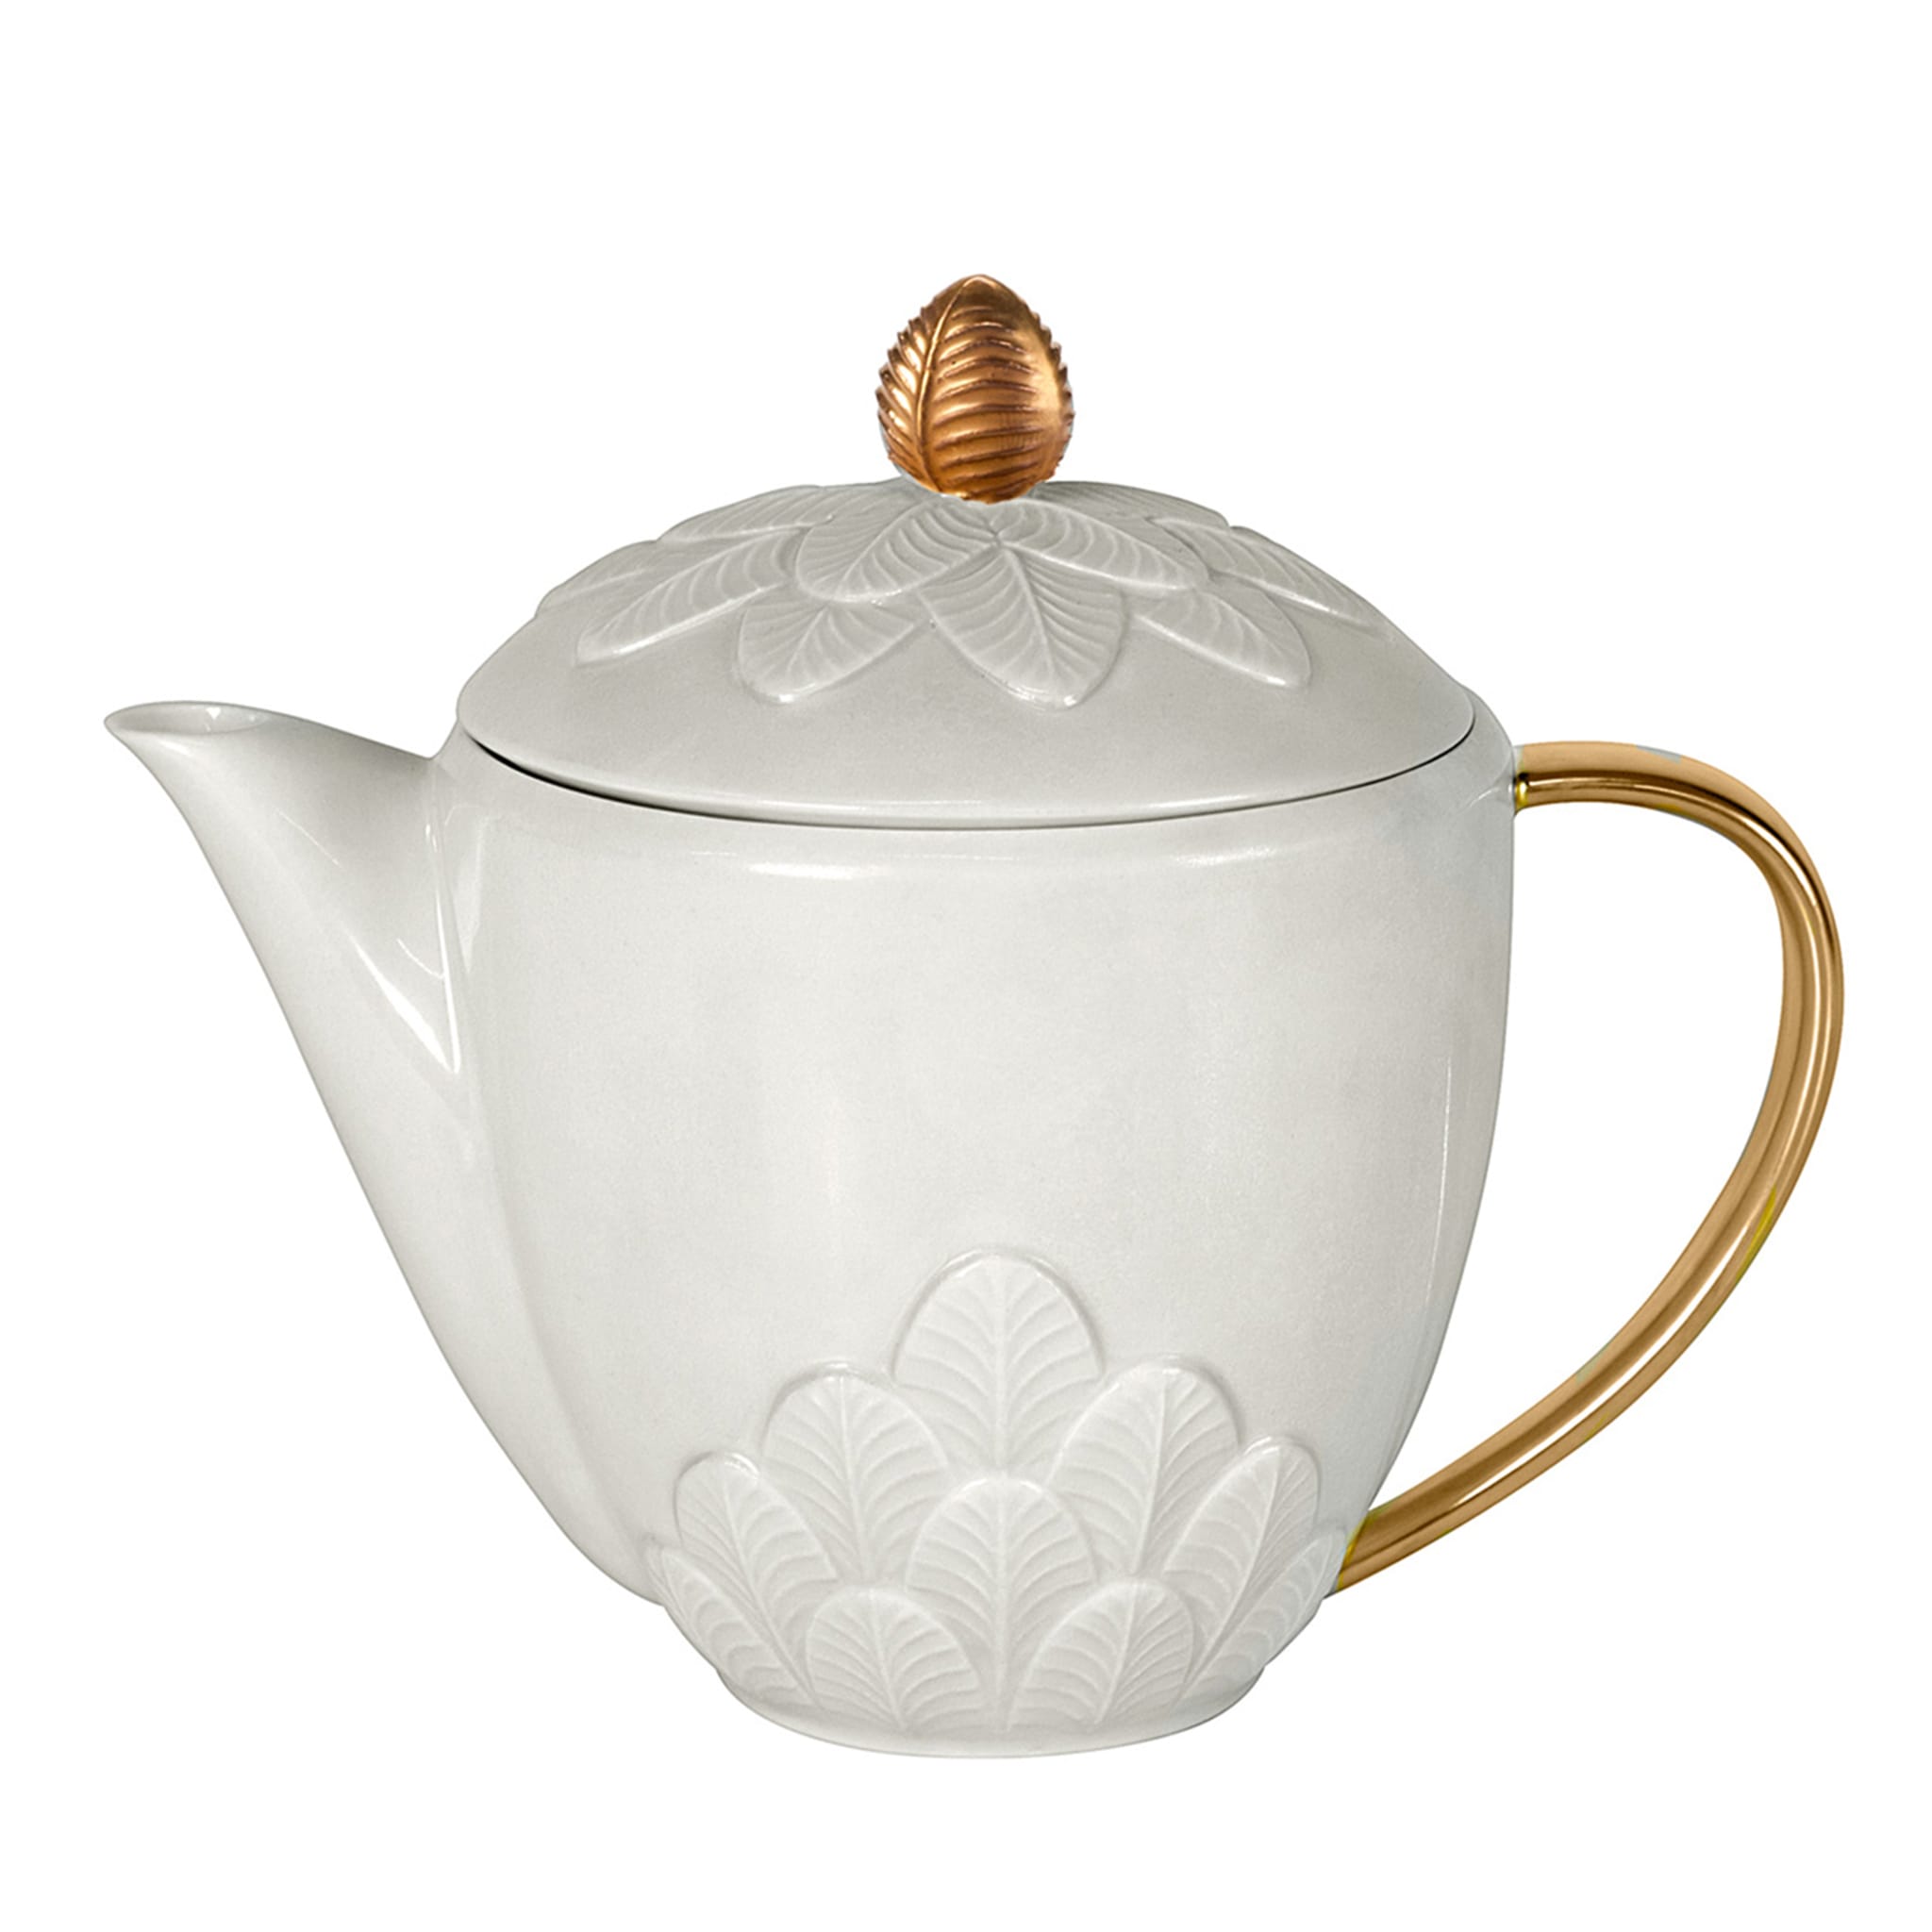 PEACOCK TEA POT - WHITE AND GOLD - Main view